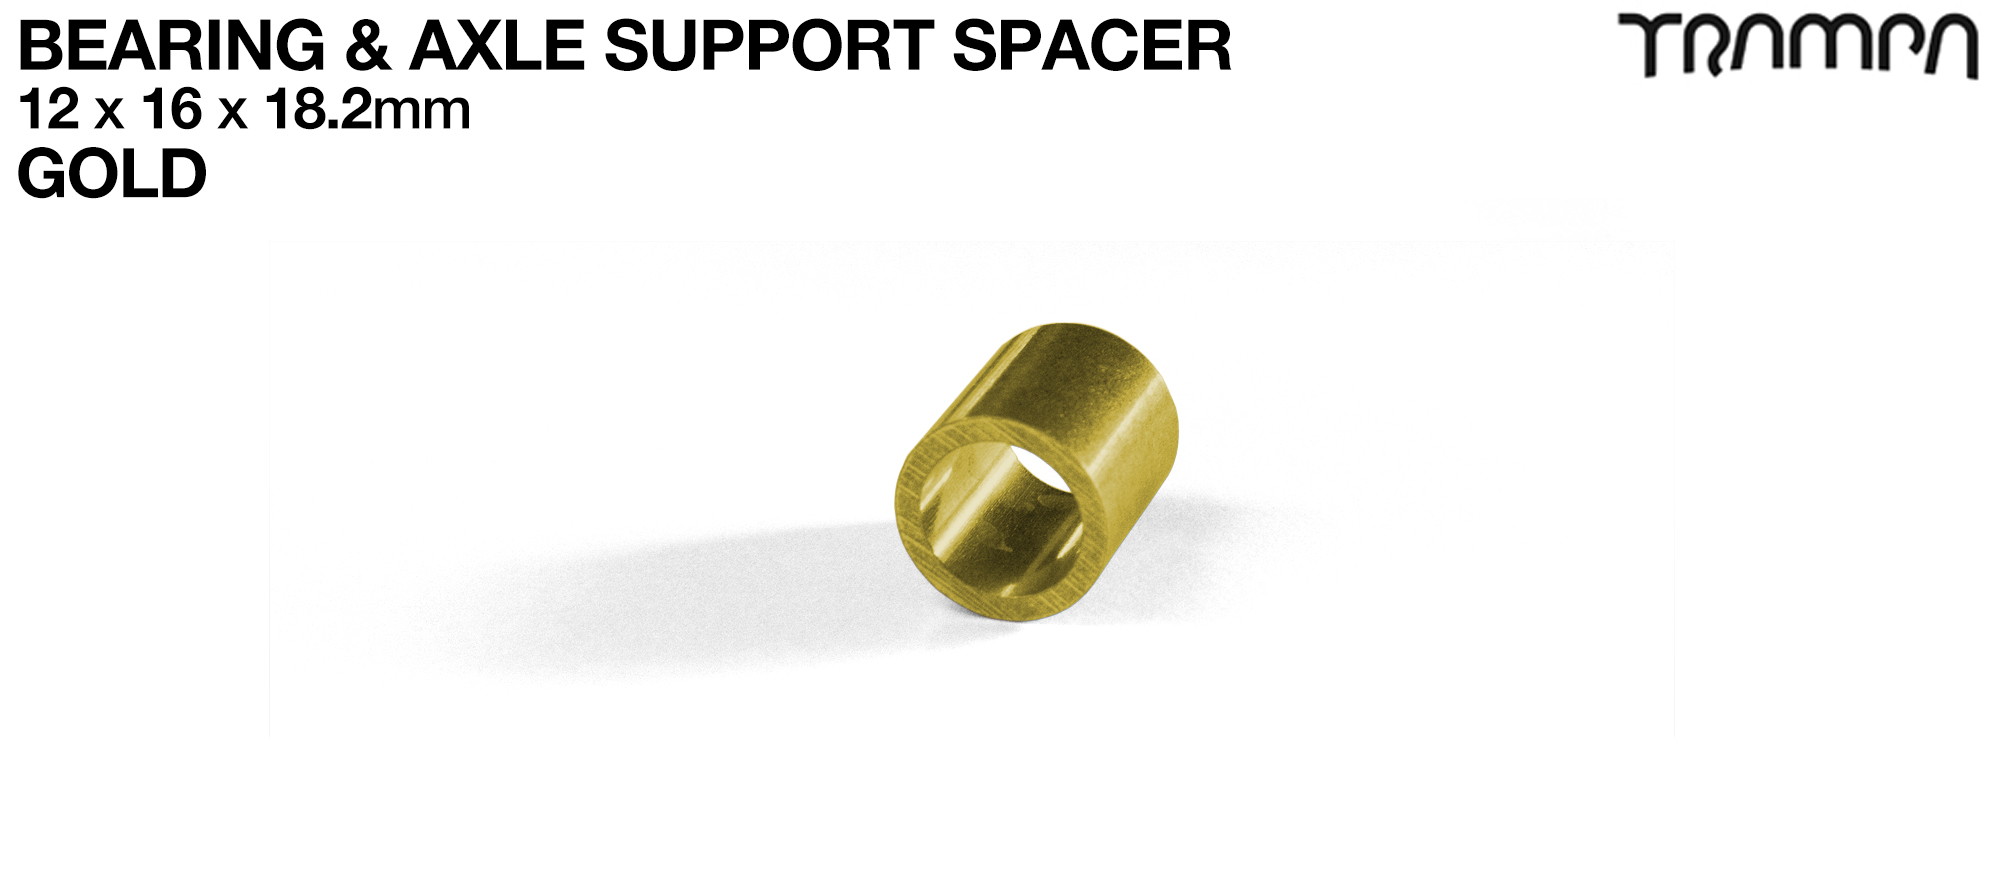 18.2mm Wheel Support Axle Spacers - GOLD 